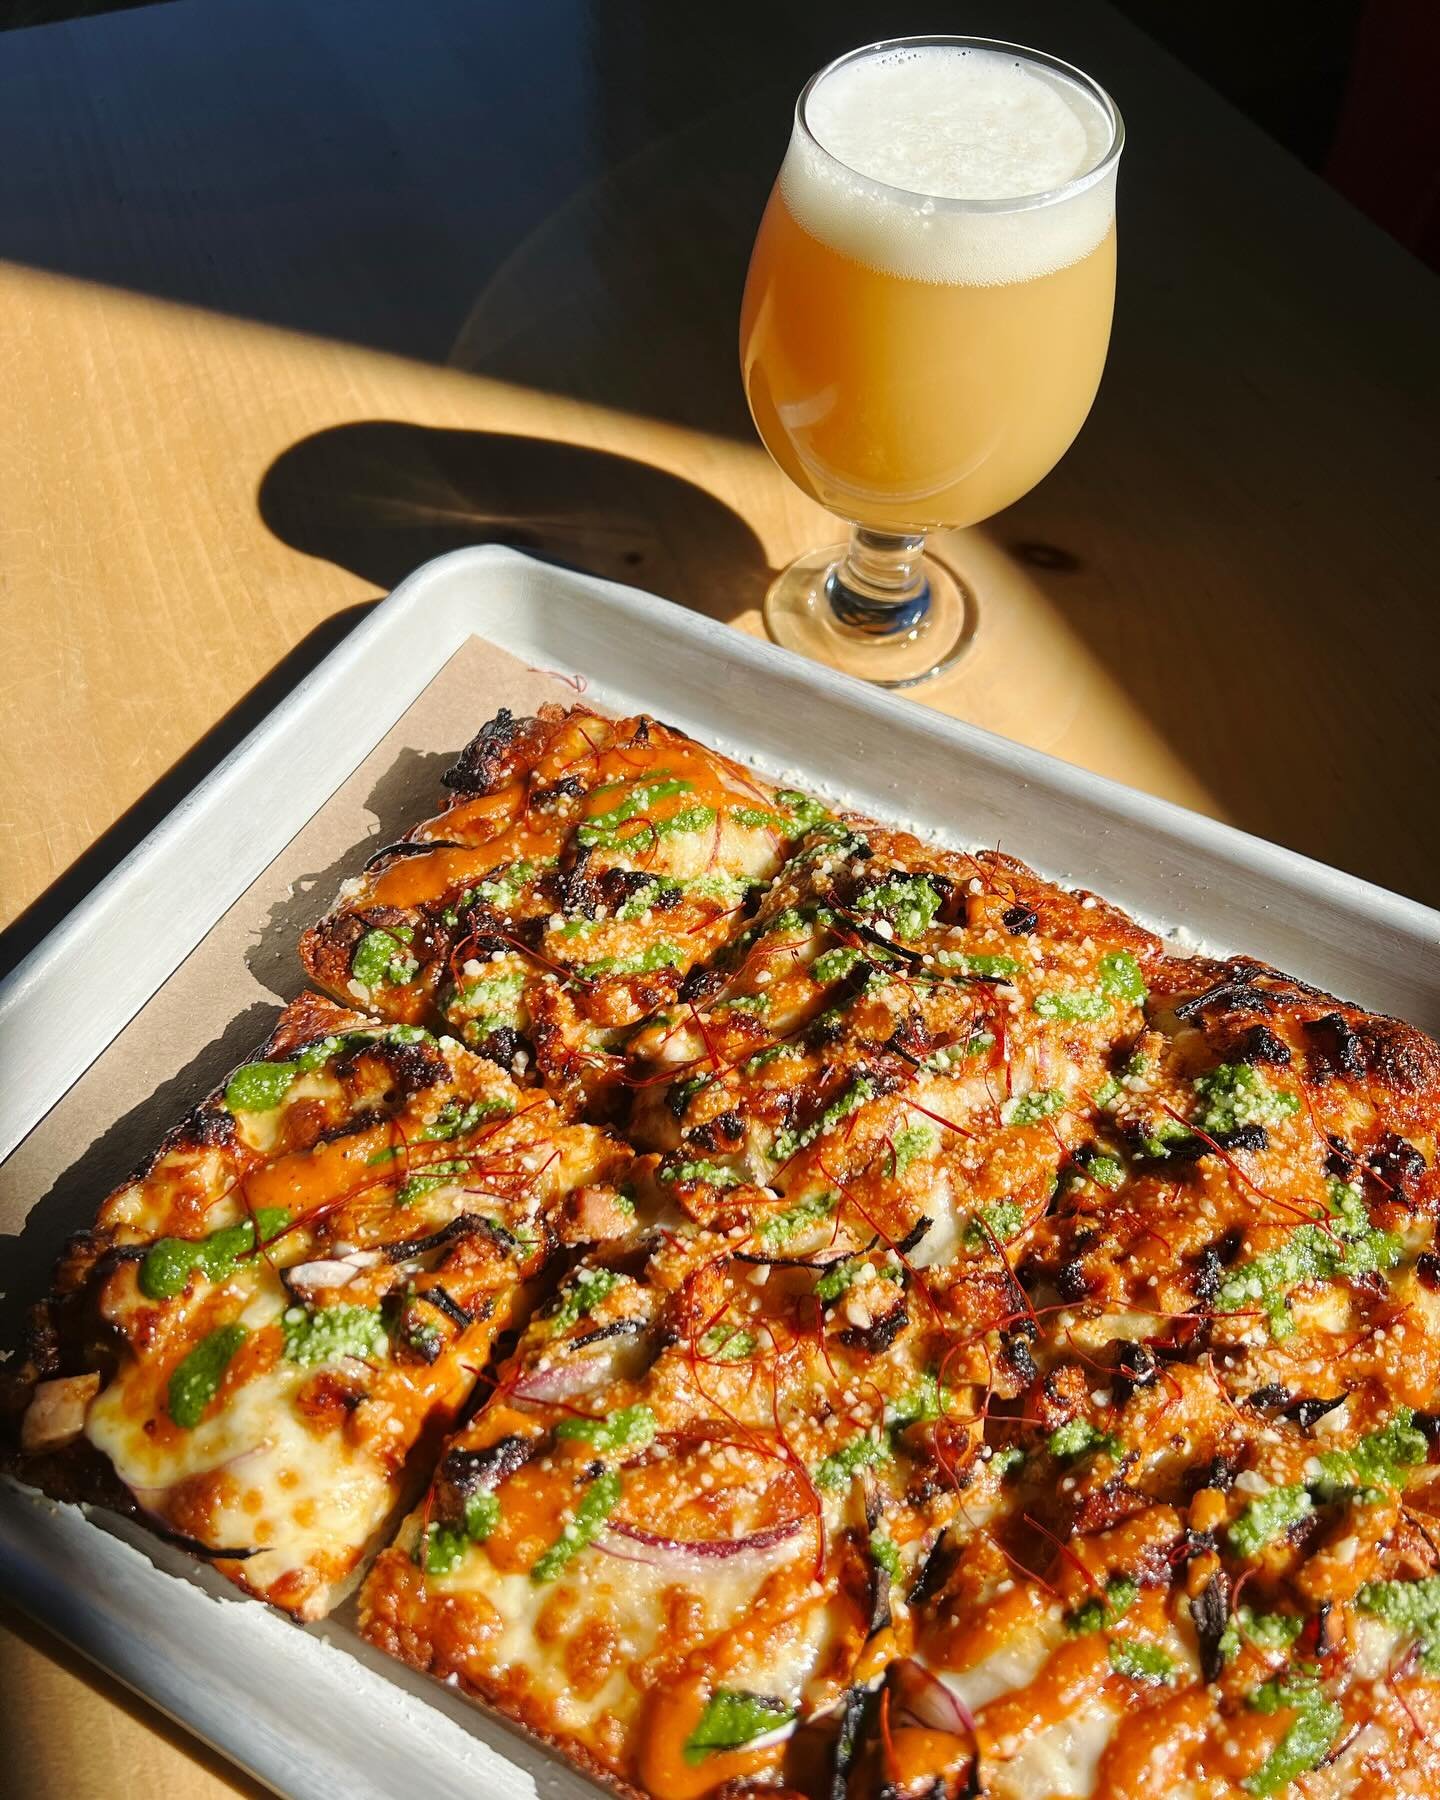 Spyglass Pizza Party!

🍕Chef Special Pizza - Smoked Chicken Tikka Masala: Smoked chicken, red onion, tikka masala sauce, mint chutney

Pair your Pizza Pie with our fresh batch of Altered State Machine!
8.4% ABV Double NE IPA - A pumped up version of